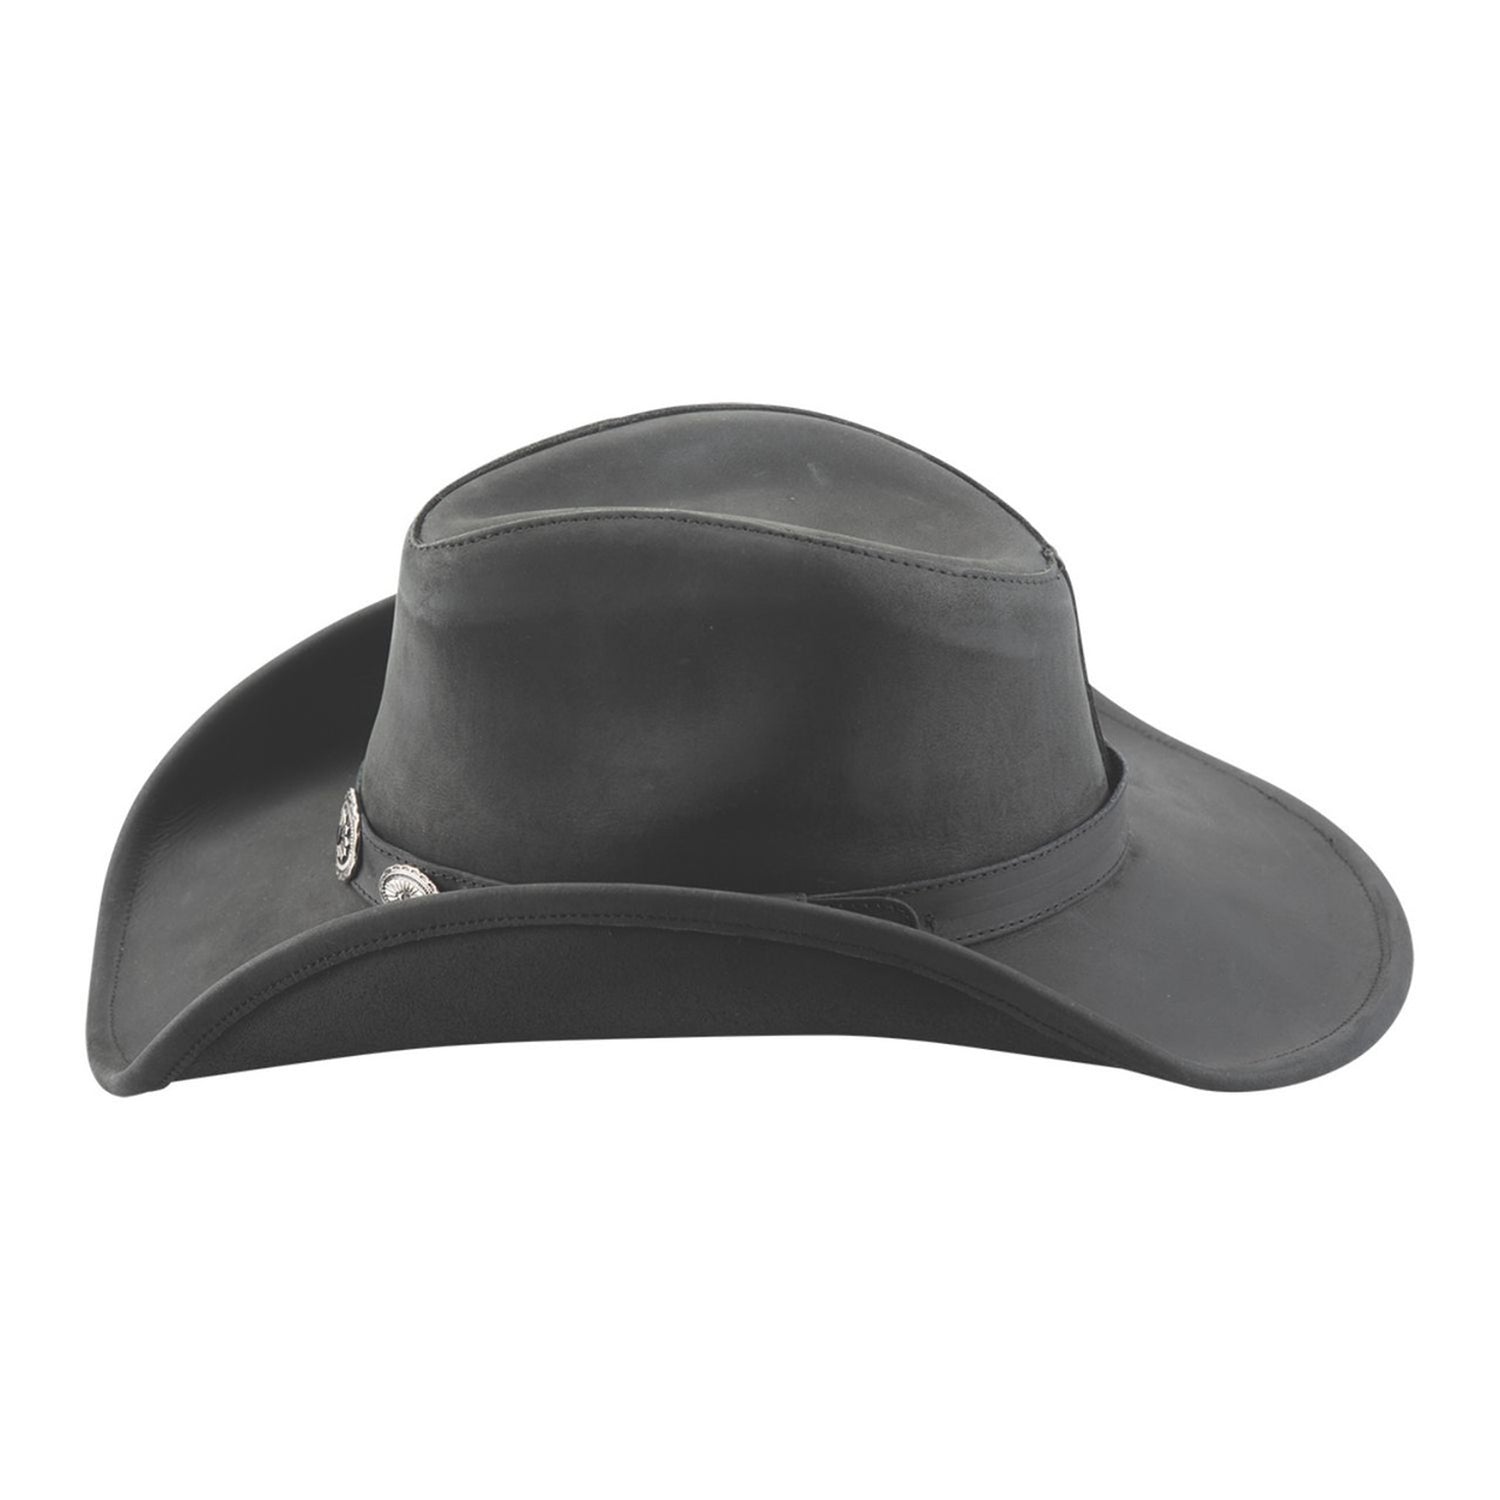 Right Now Leather Cowboy Hat